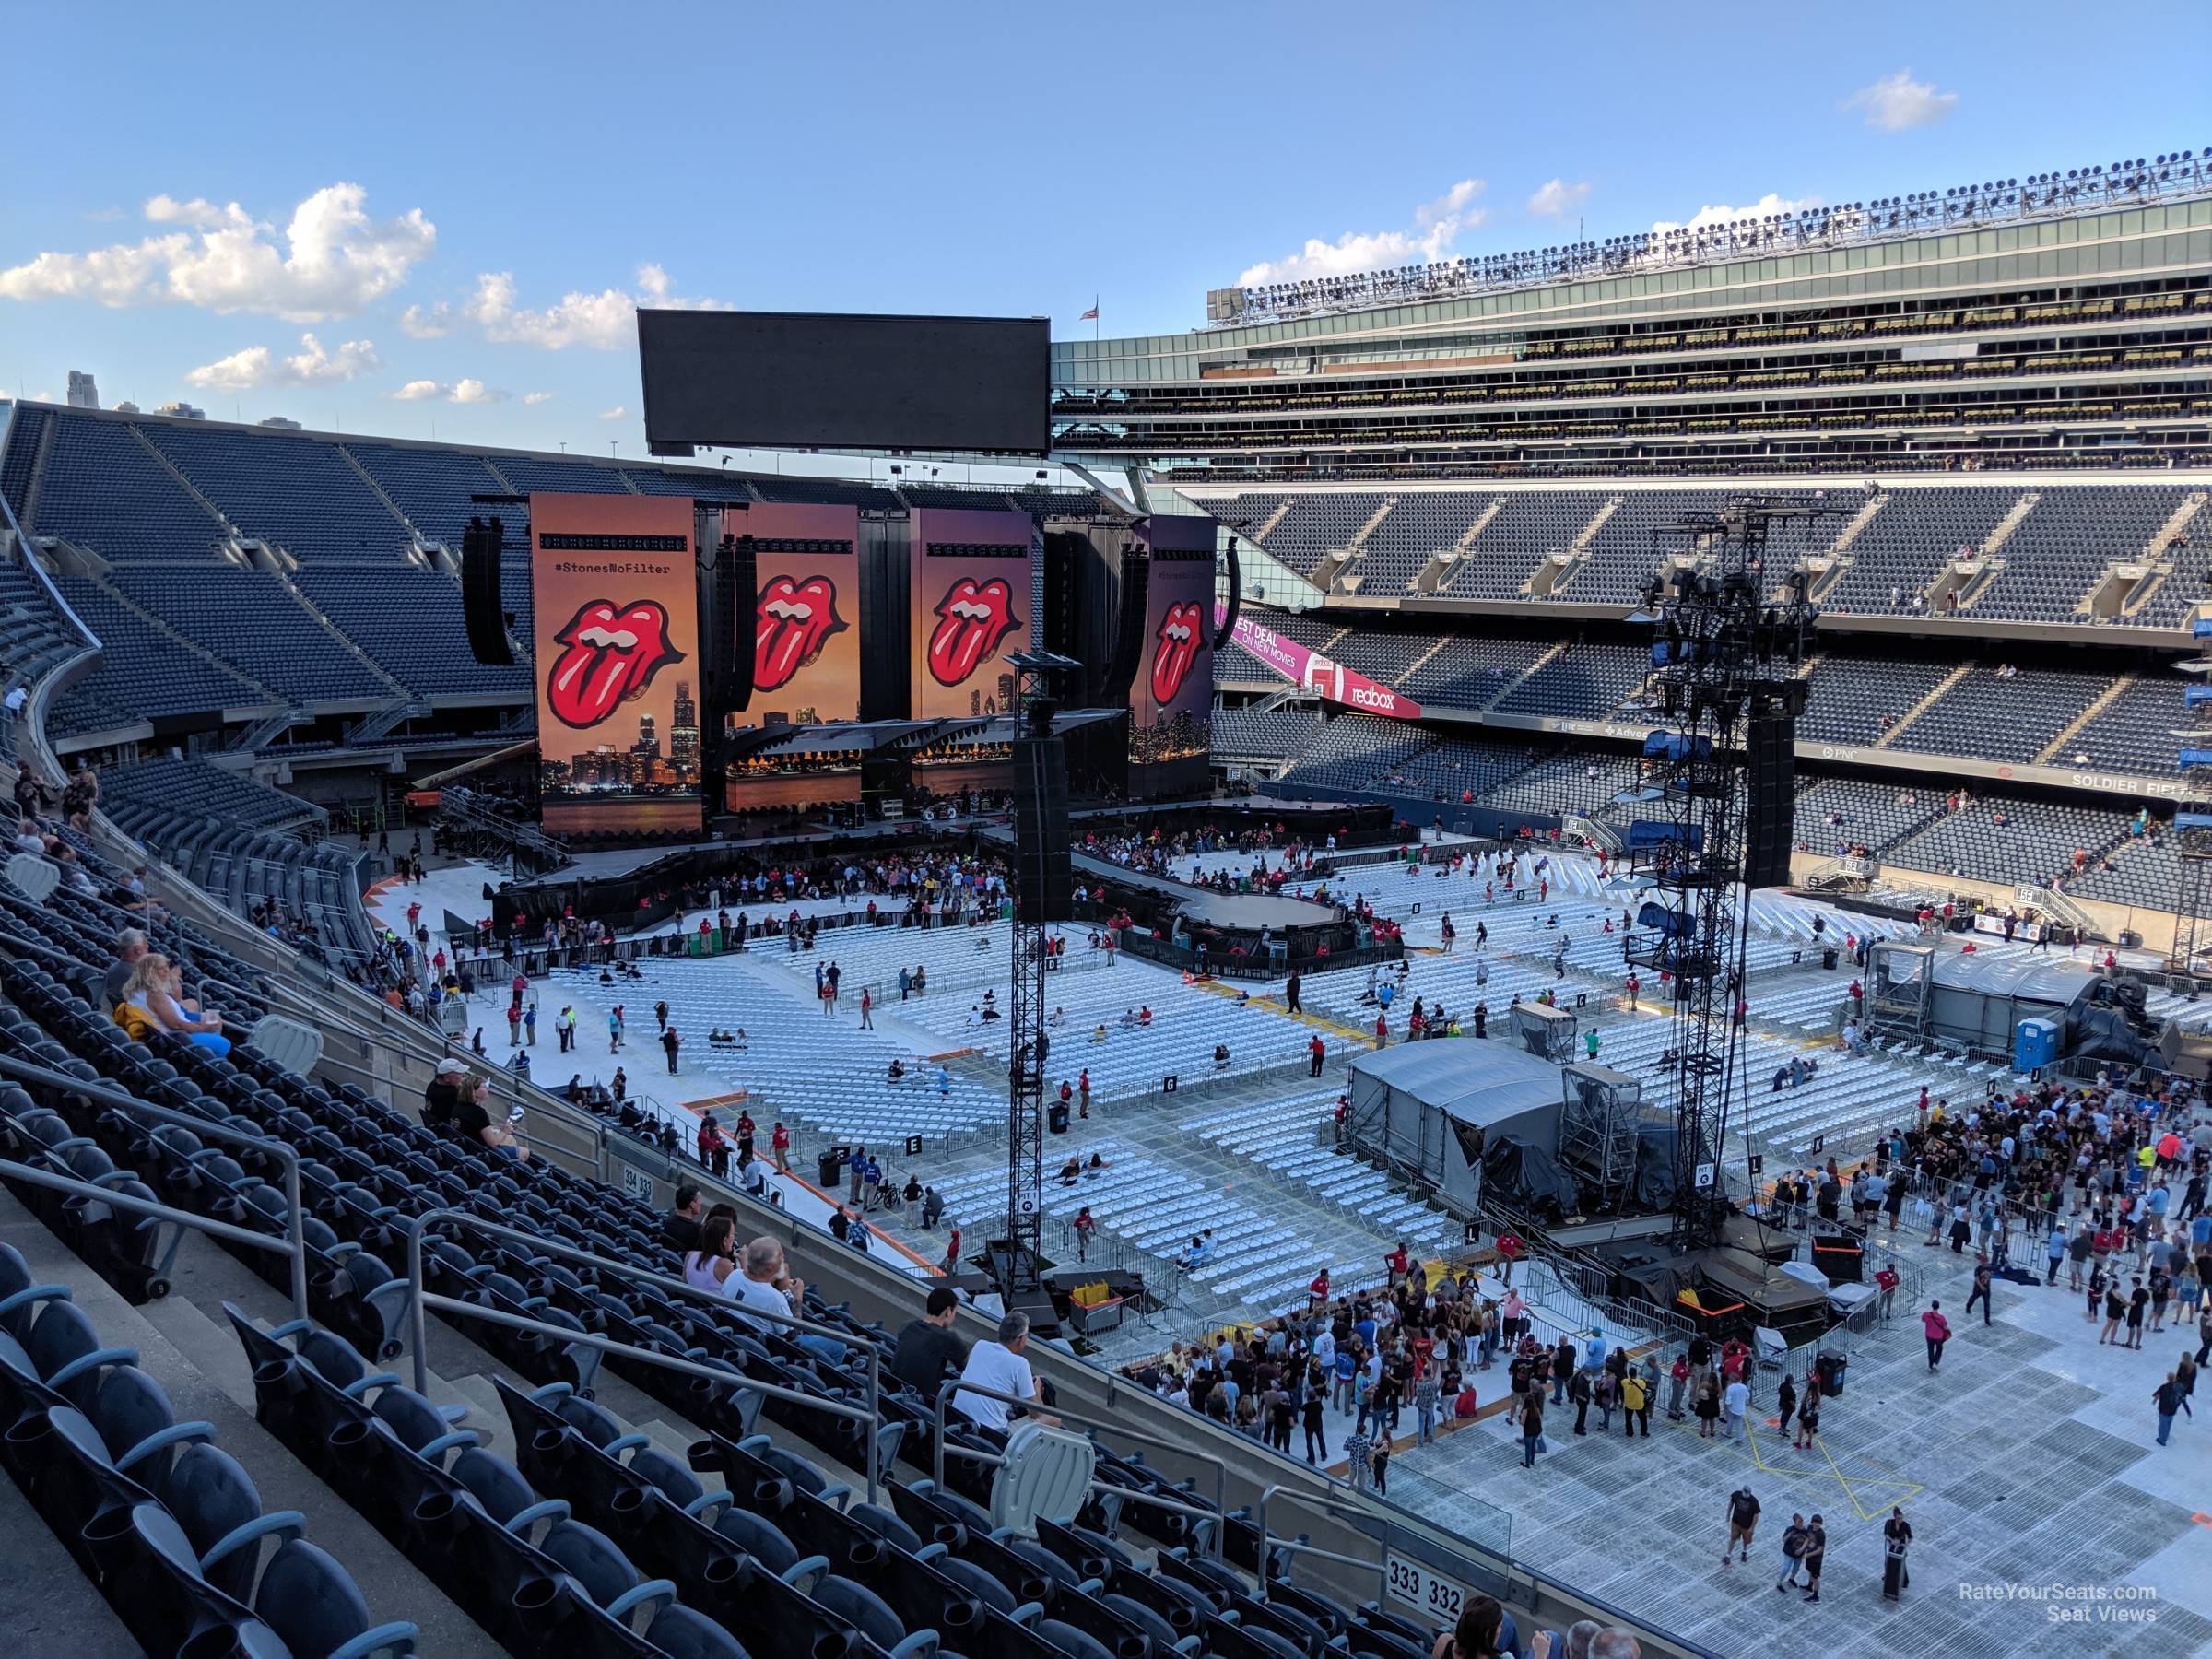 Section 332 at Soldier Field